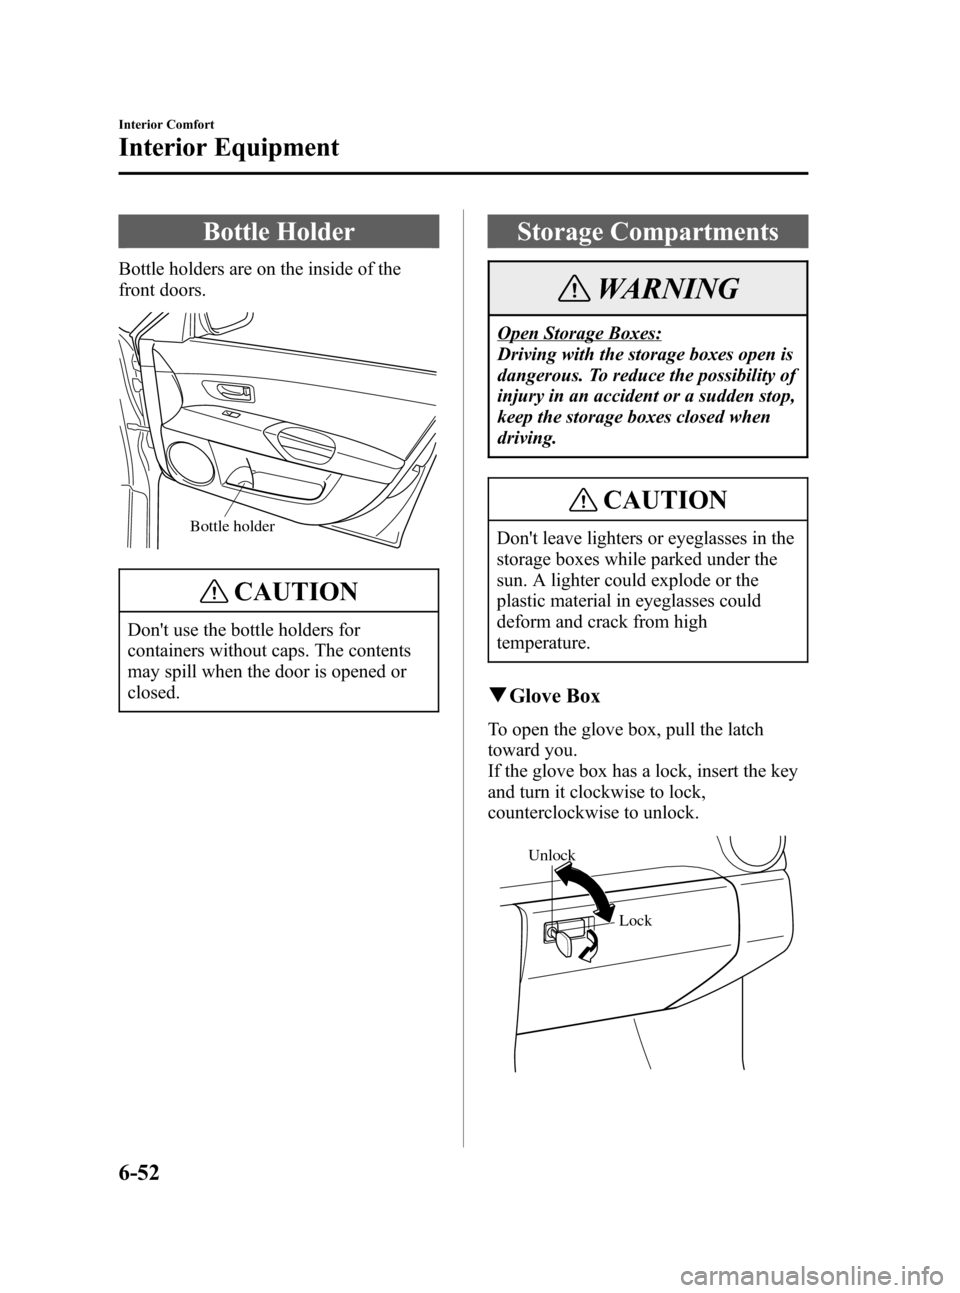 MAZDA MODEL 3 HATCHBACK 2006  Owners Manual (in English) Black plate (222,1)
Bottle Holder
Bottle holders are on the inside of the
front doors.
Bottle holder
CAUTION
Dont use the bottle holders for
containers without caps. The contents
may spill when the d